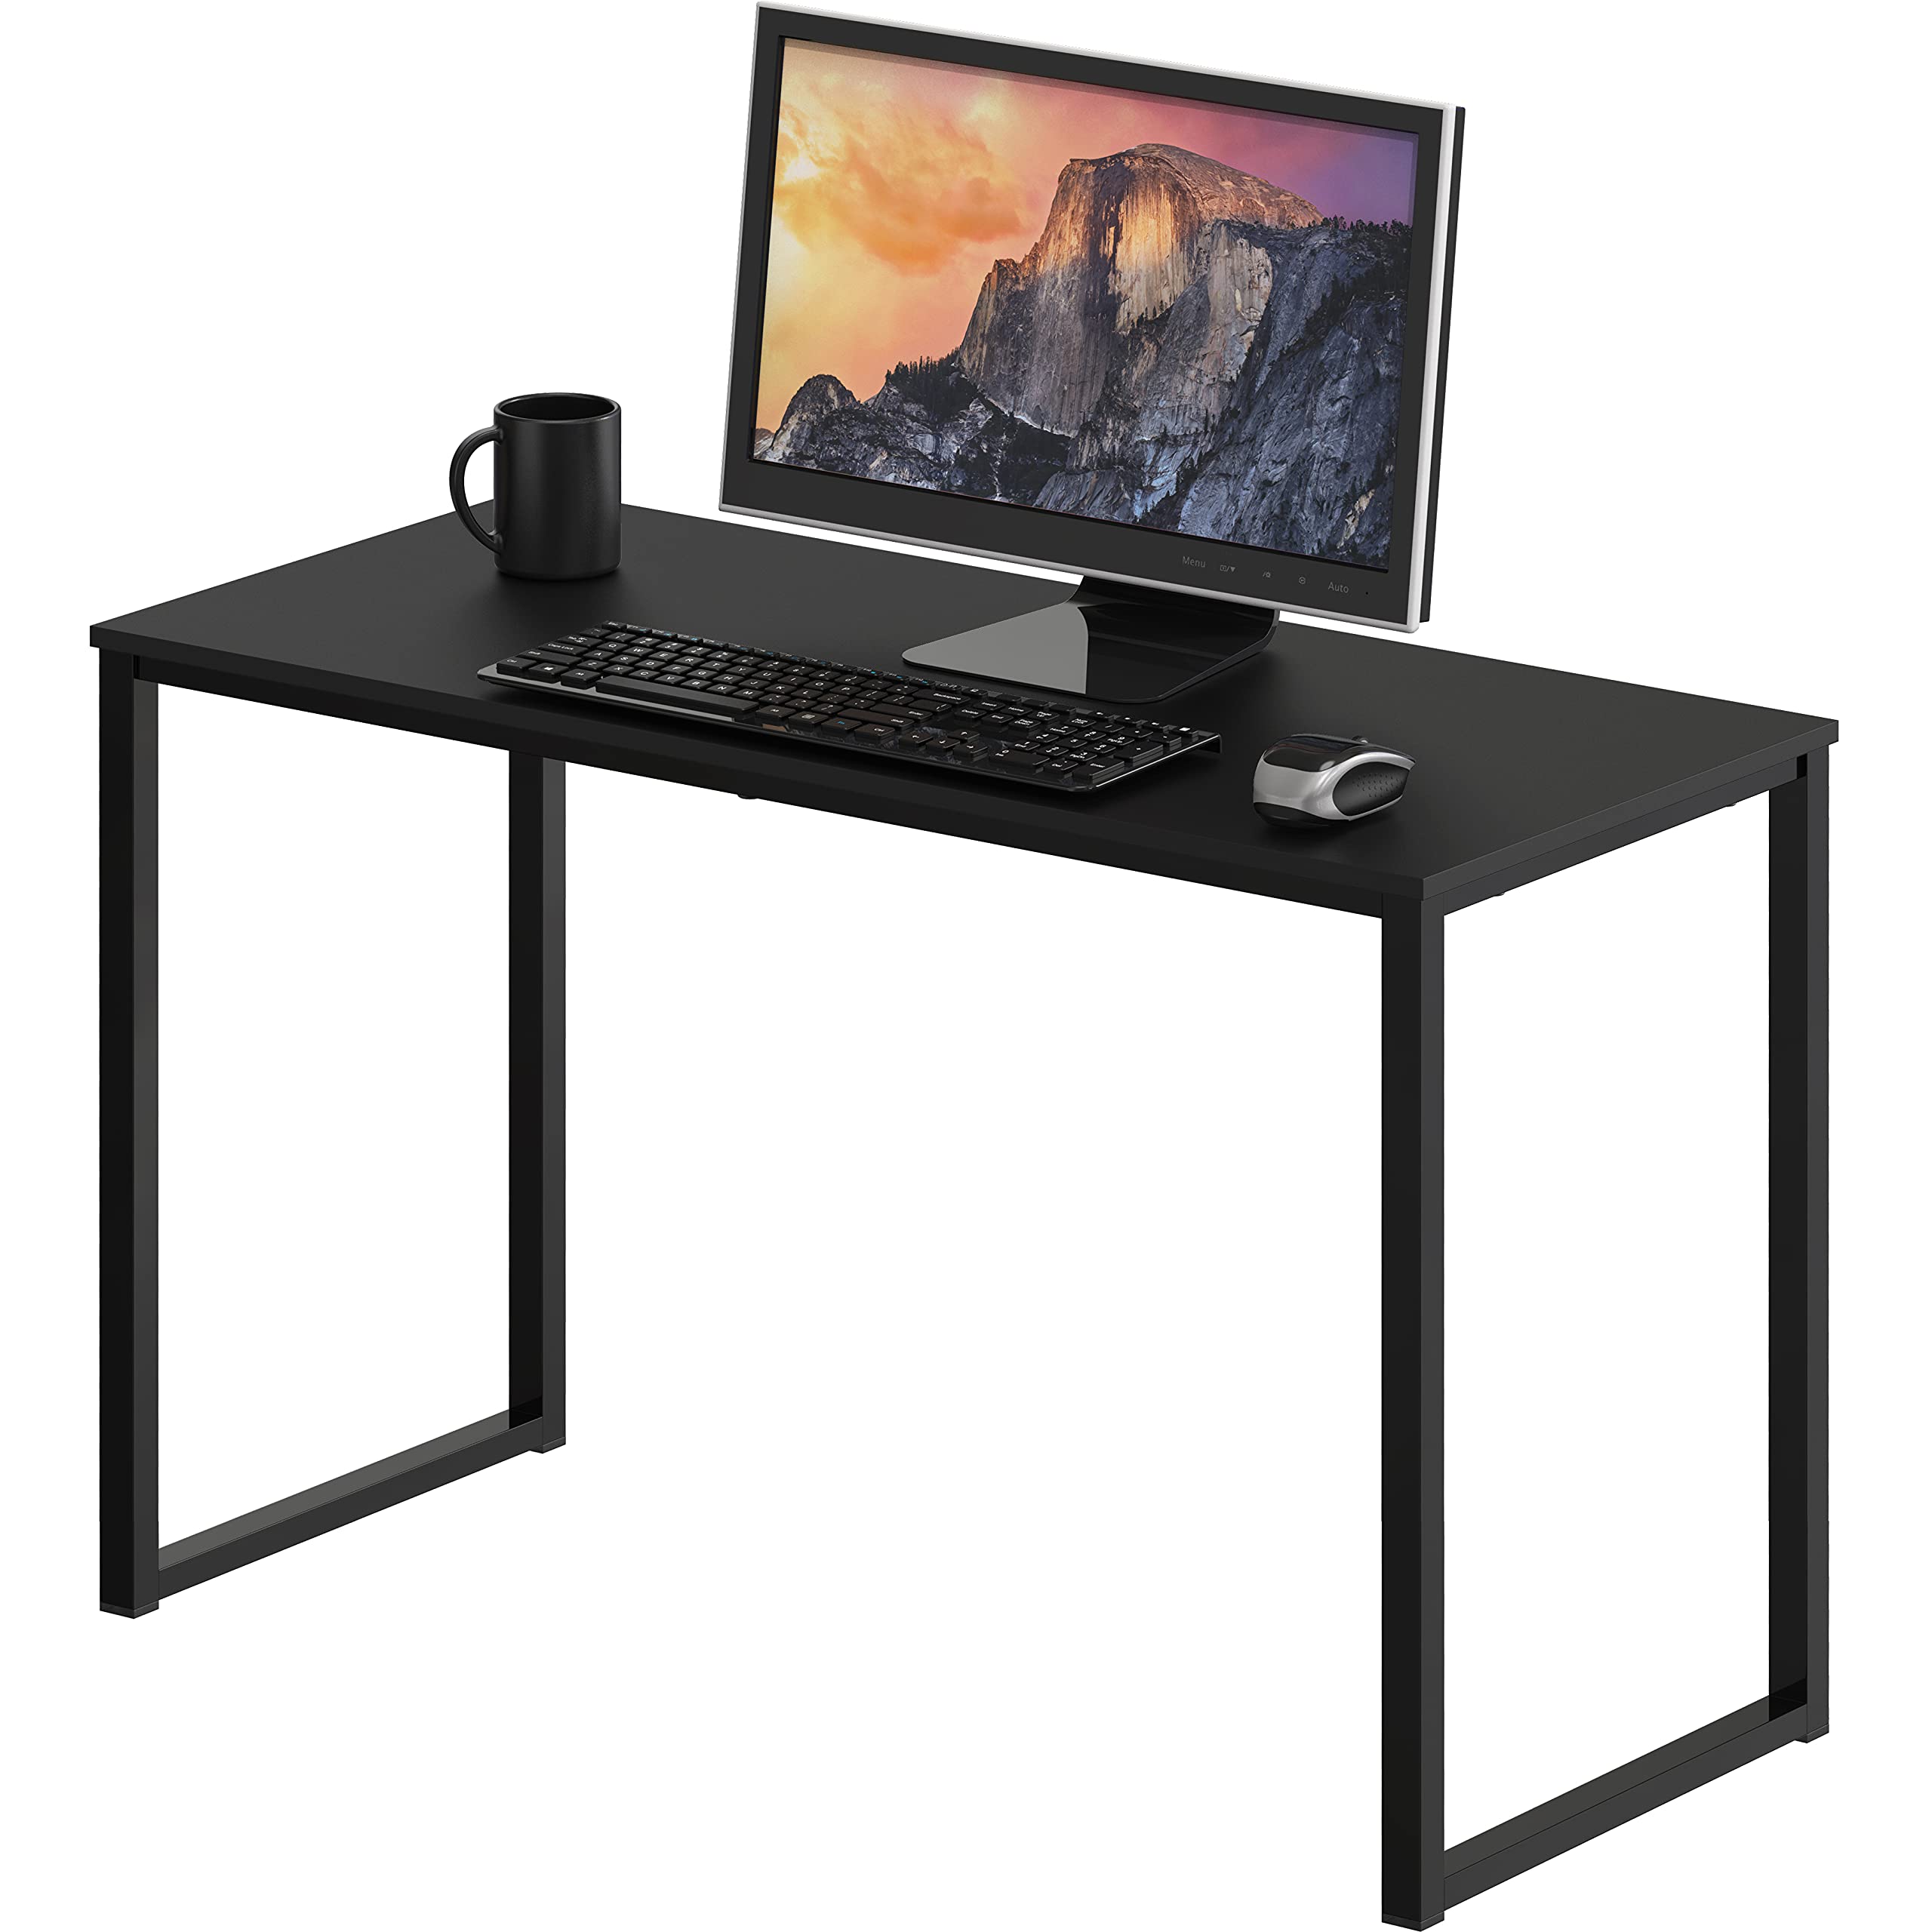 SHW Mission 32 inches office desk, Black - image 1 of 5